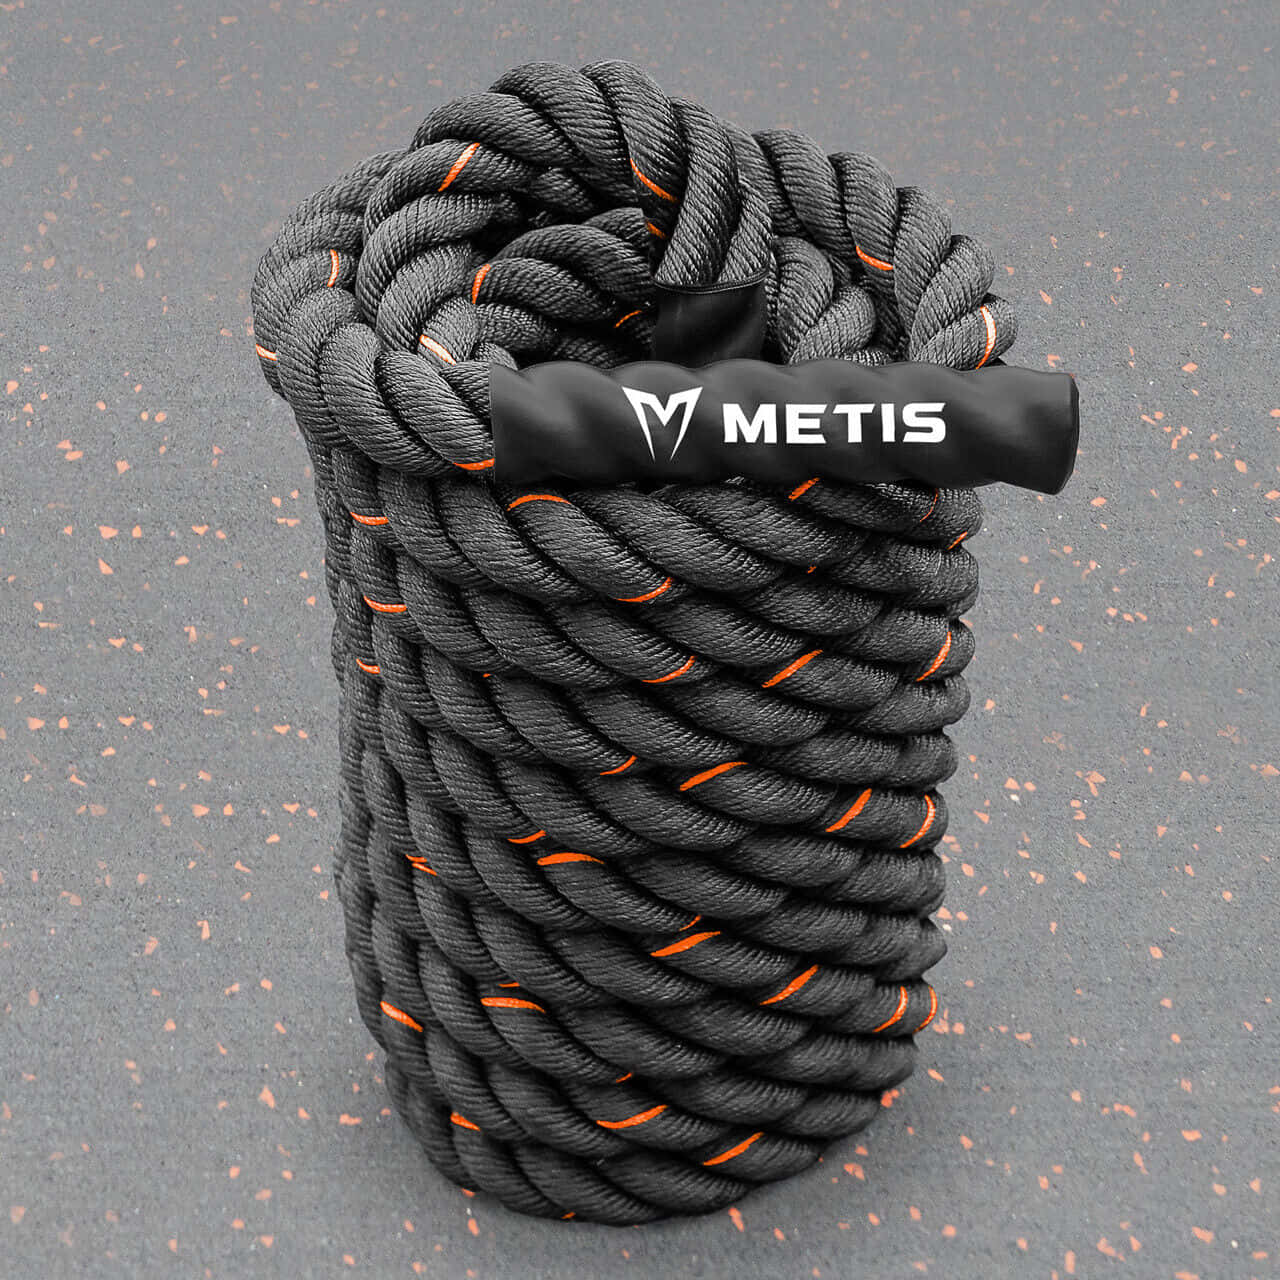 Metis Battle Rope Picture